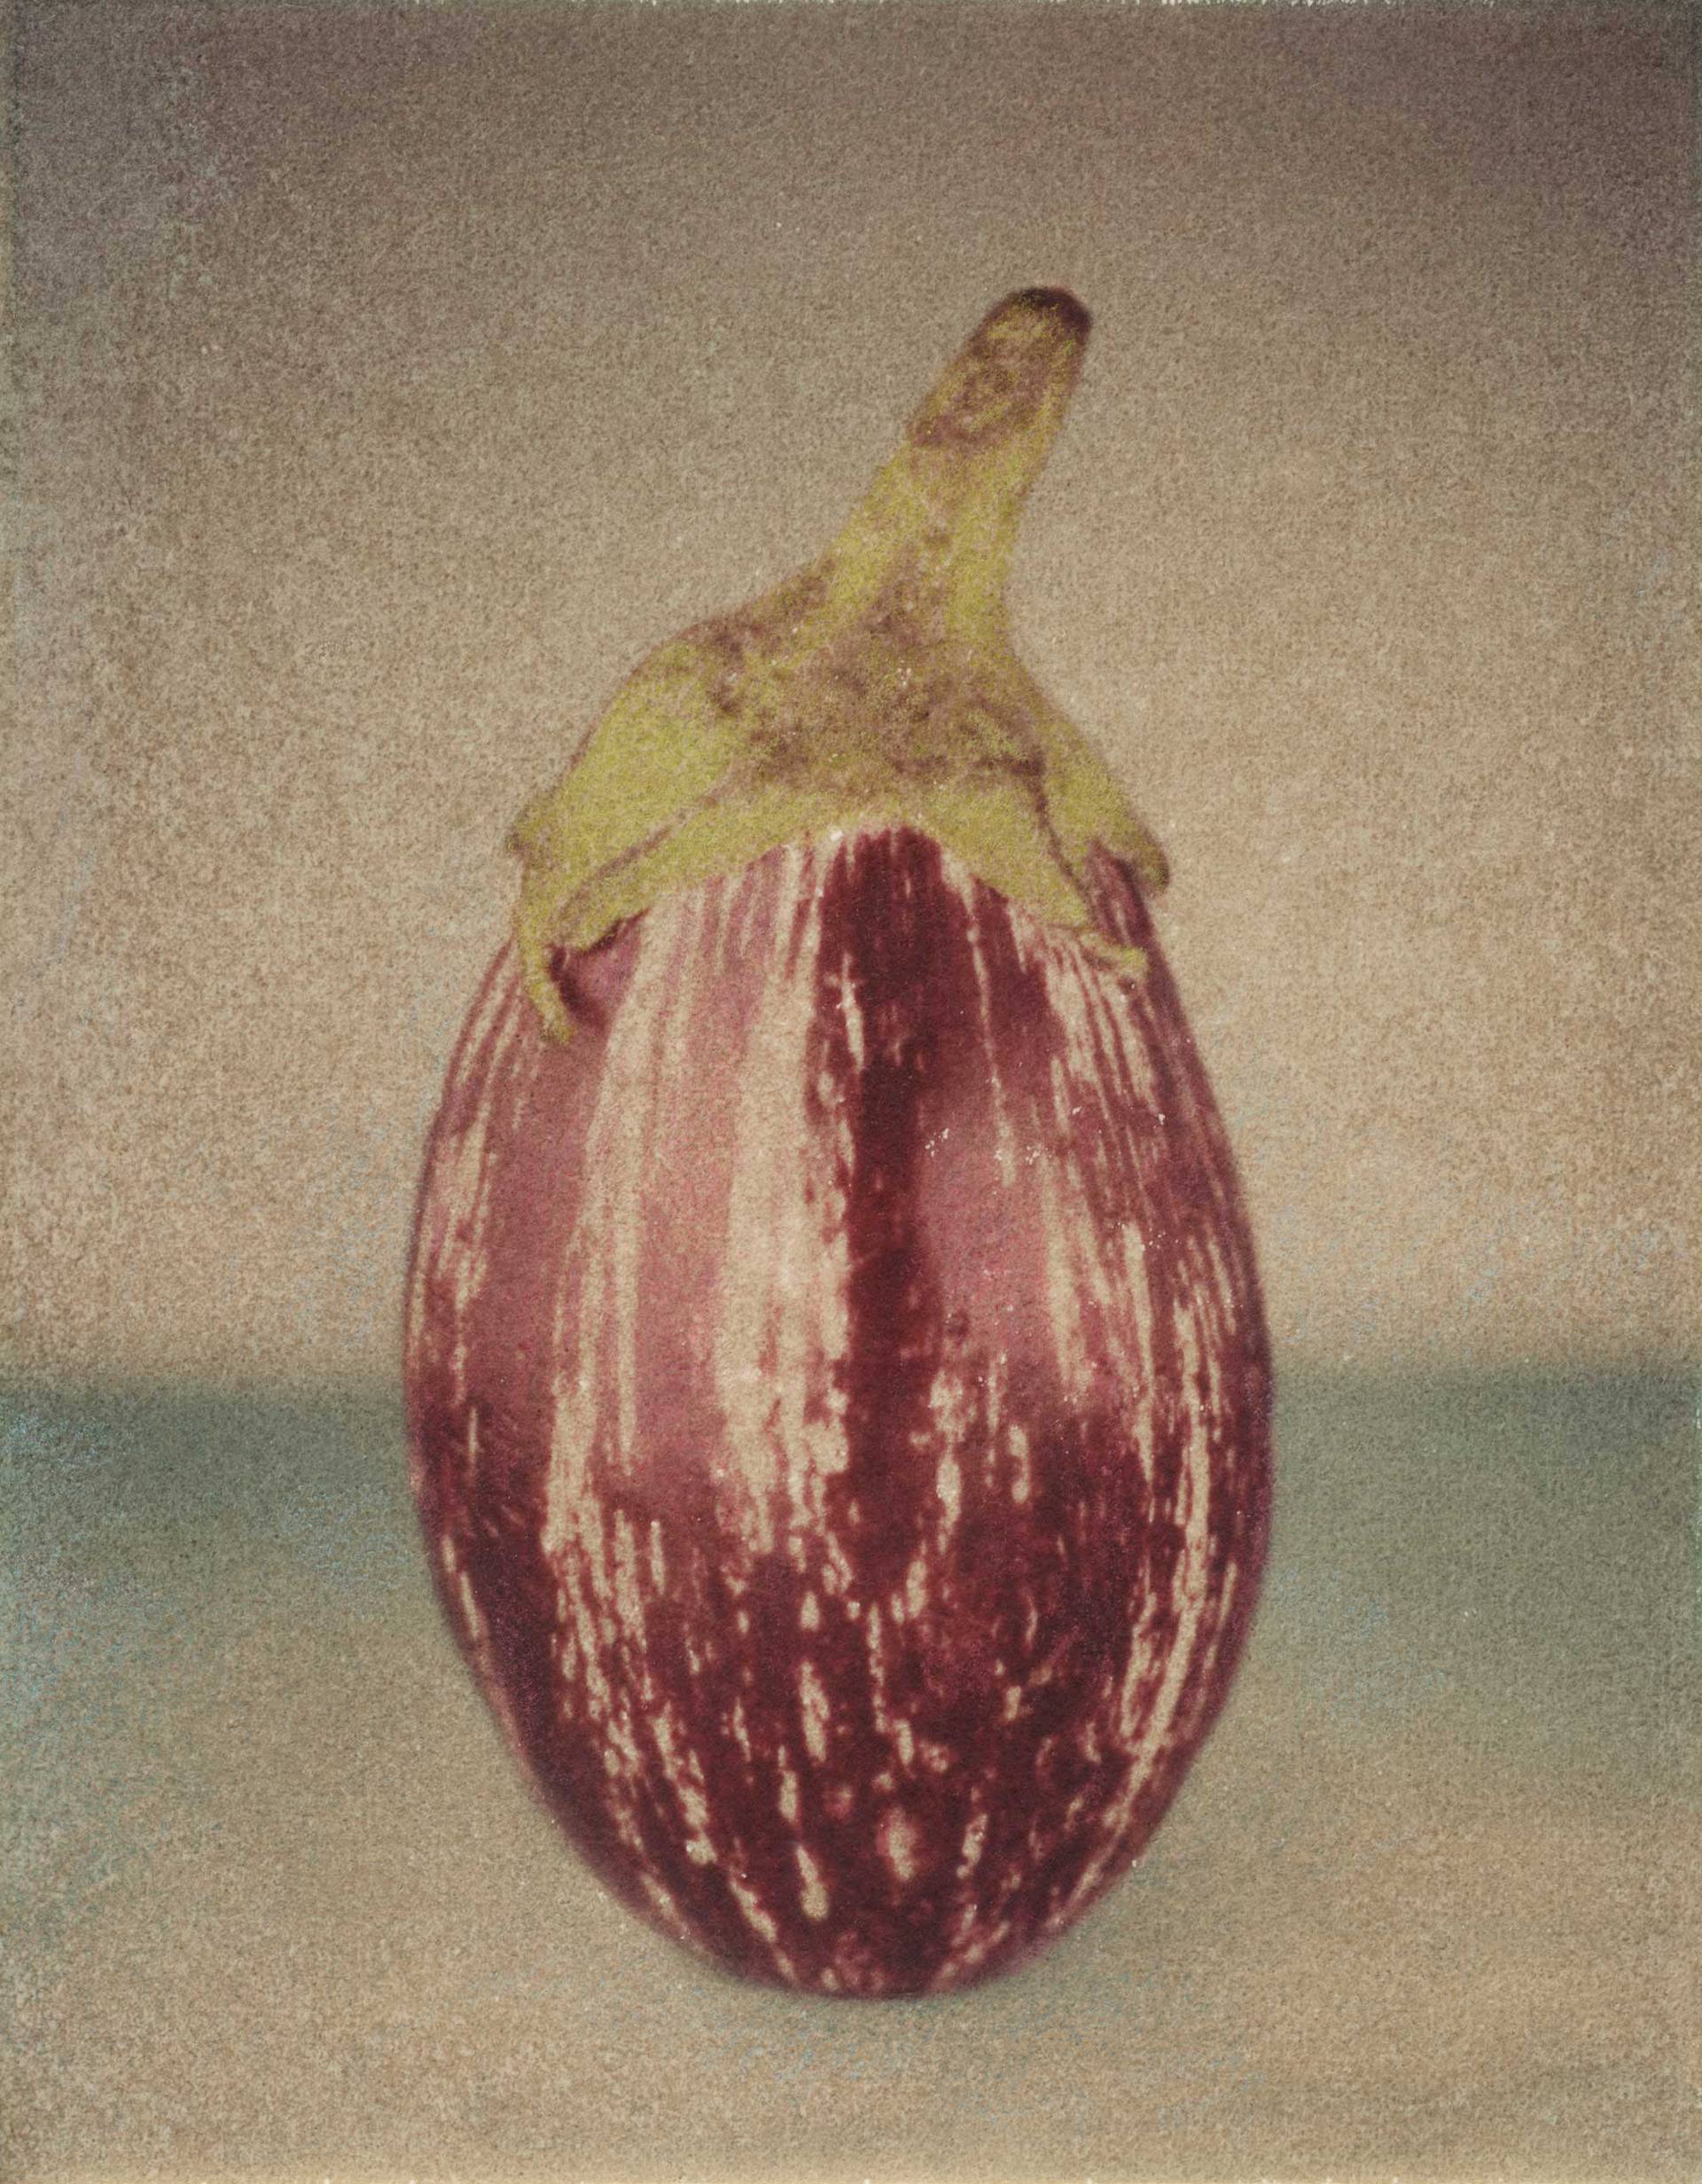 The eggplant is a symbol of Sephardic resilience, identity, and survival 